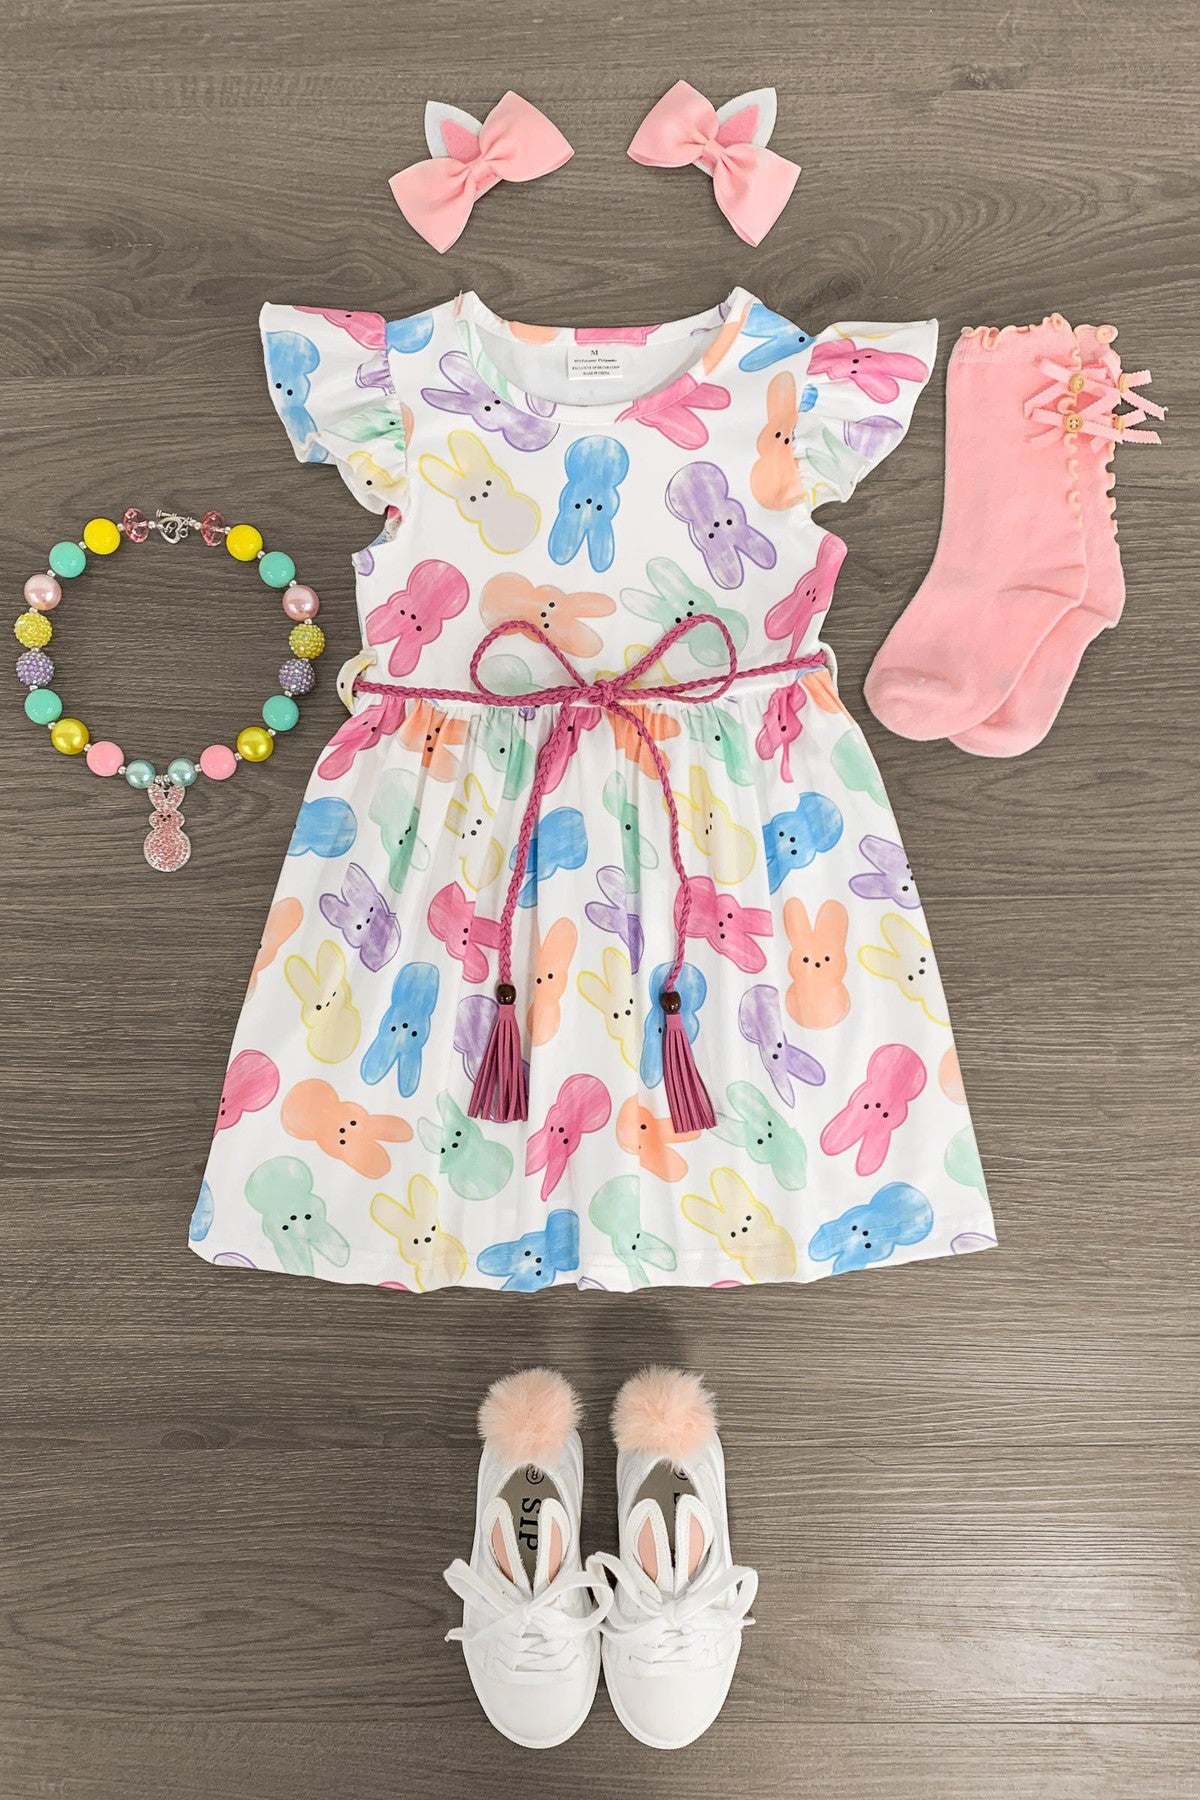 Pastel Peep Bunny Dress - Sparkle in Pink